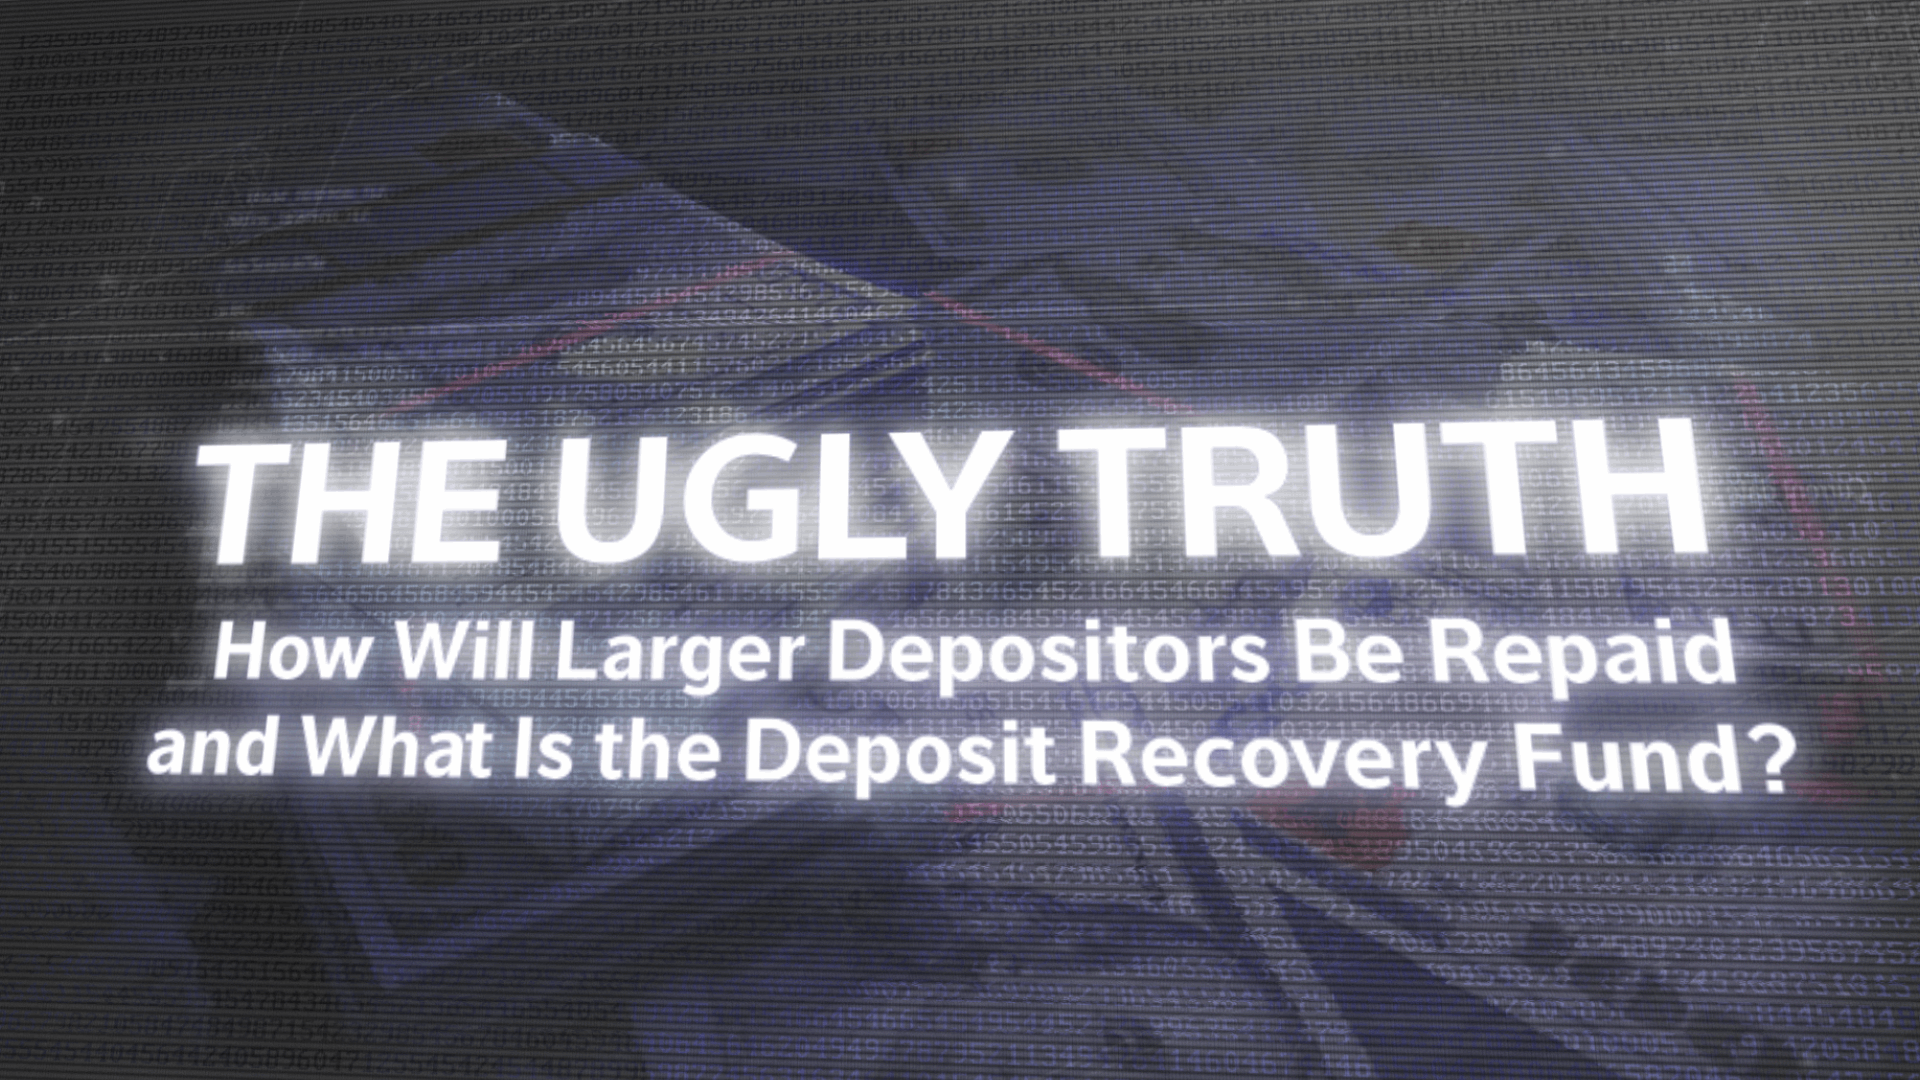 The ugly truth: How will larger depositors be repaid and what is the deposit recovery fund?